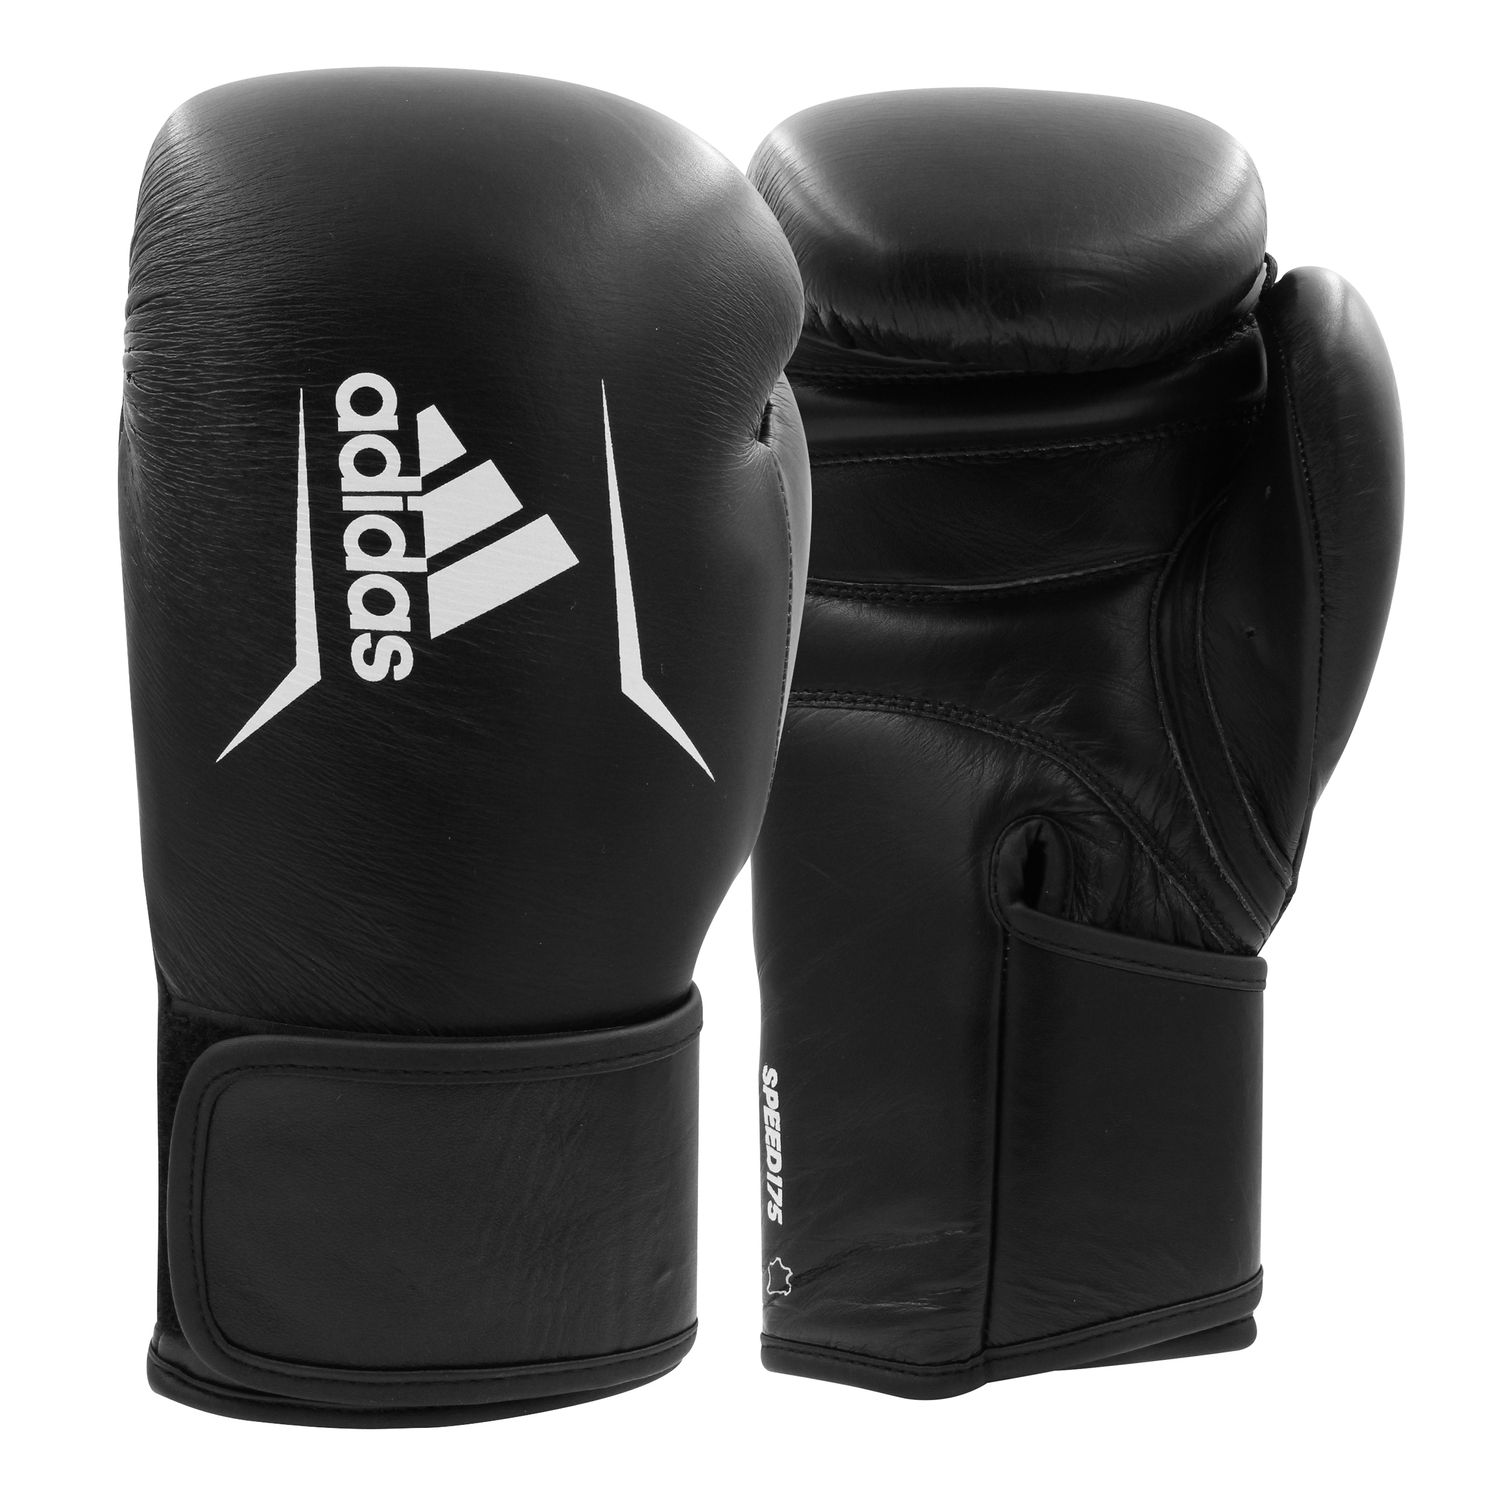 adidas Speed 175 Genuine Leather Boxing and Kickboxing Gloves